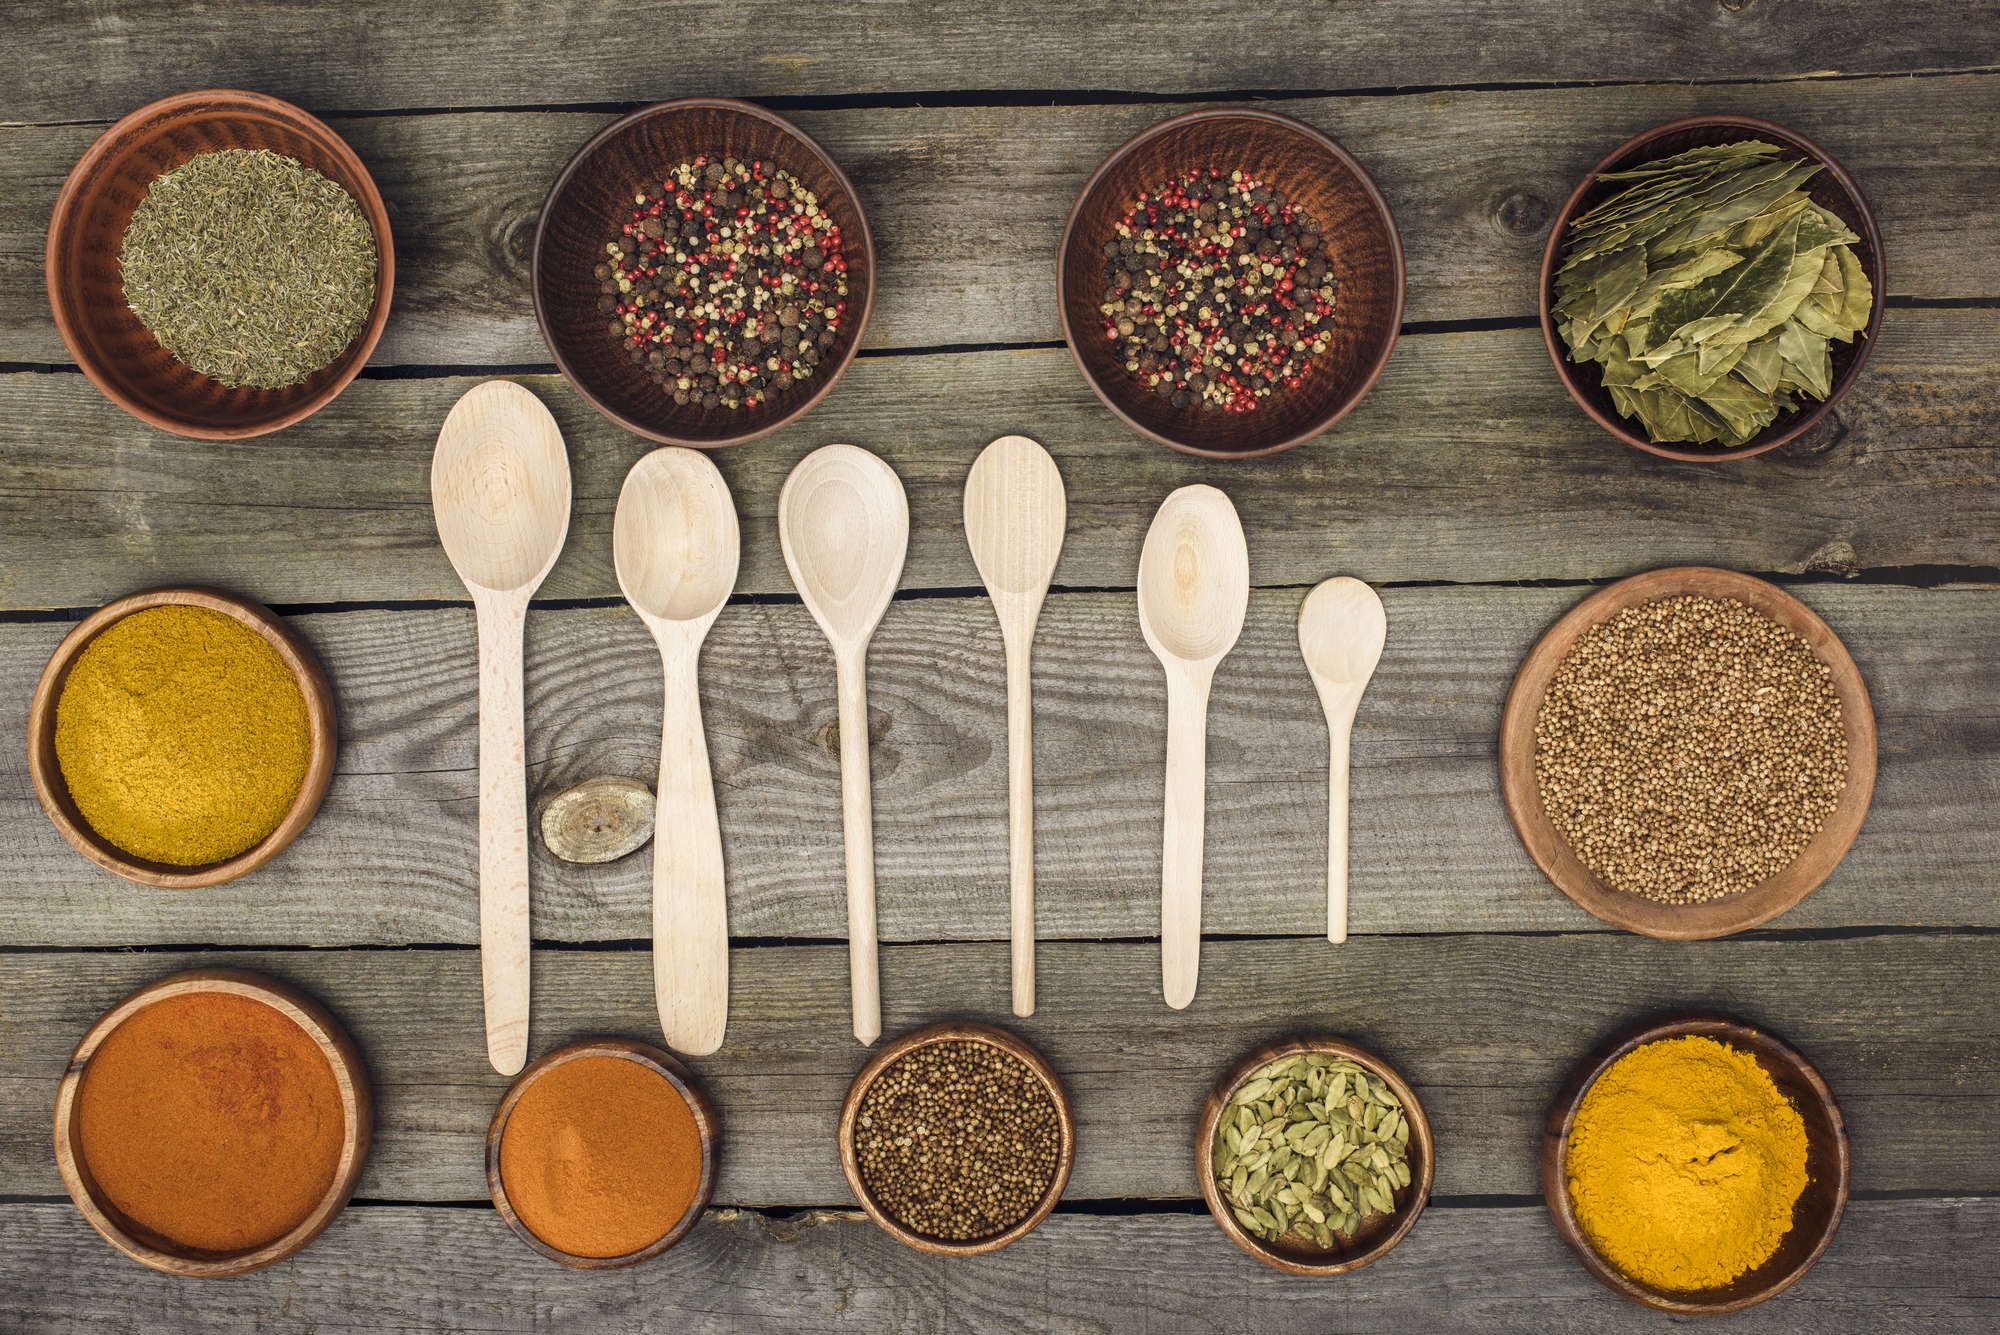 Wooden spoons surrounded by bowls of spices on a wooden board.